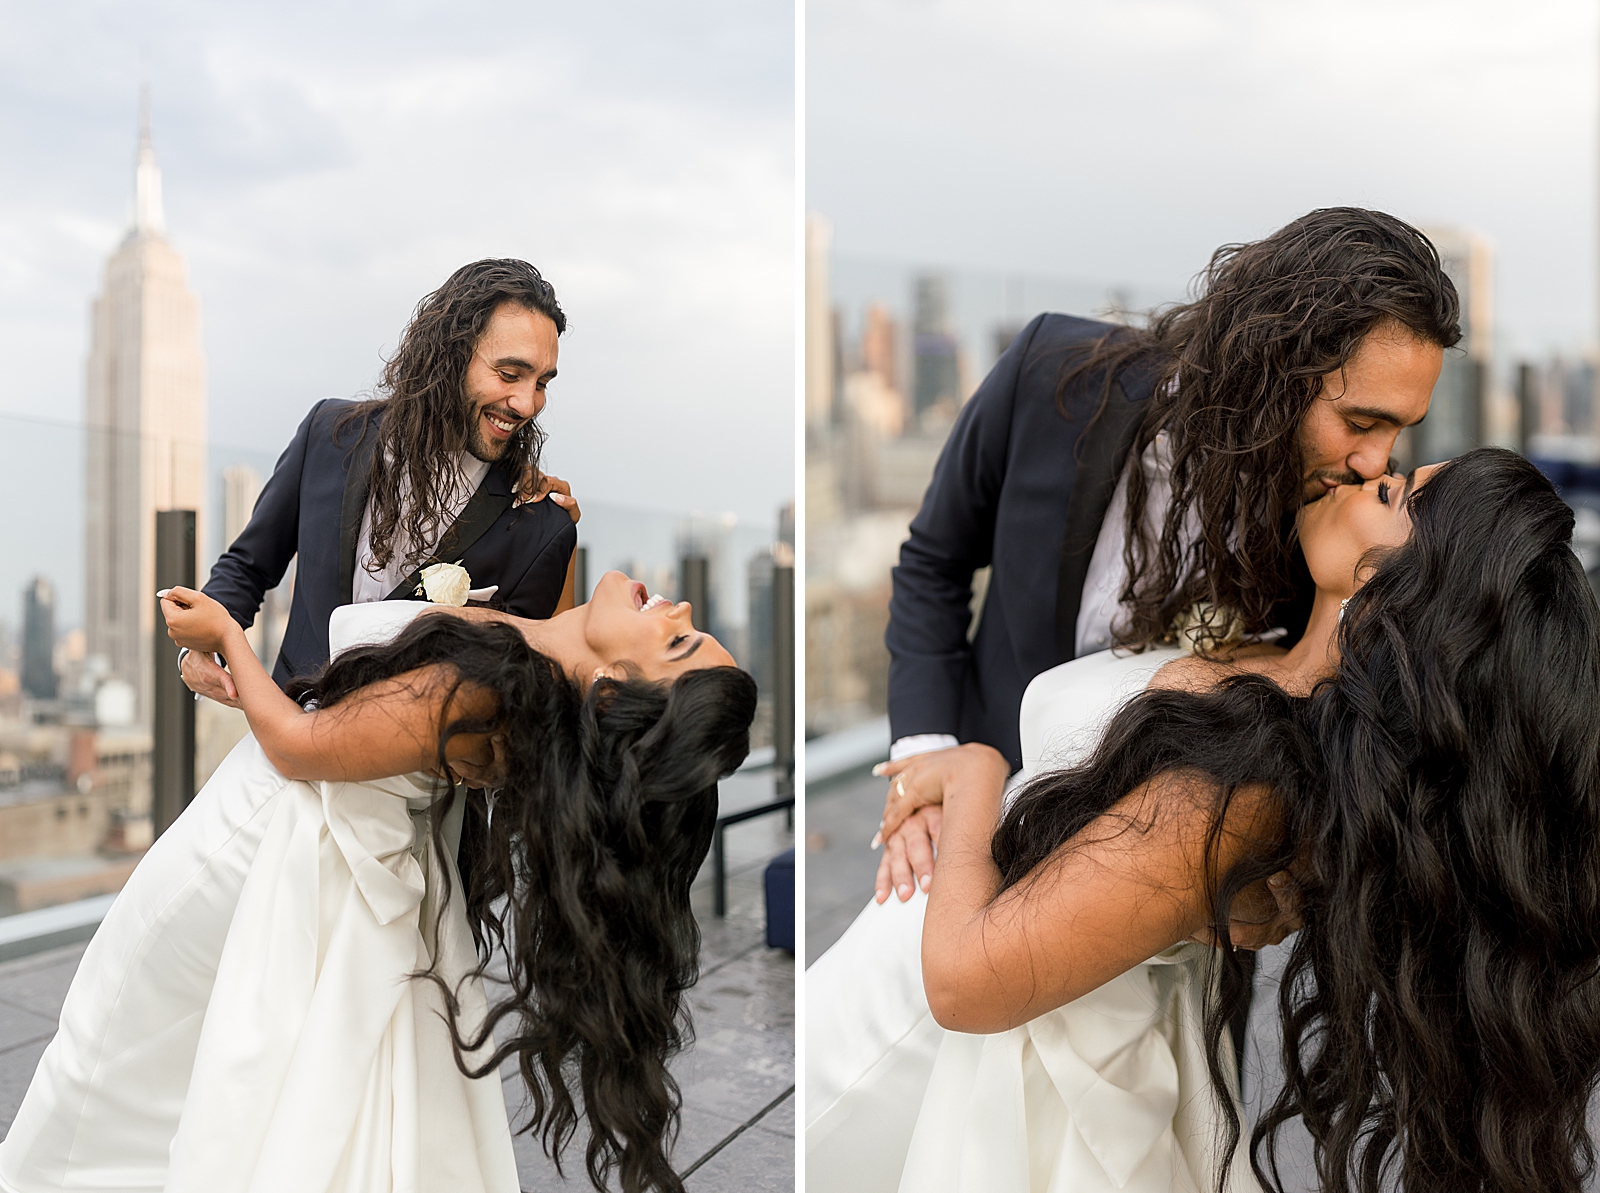 Bride dipping in Groom's arms and kissing on rooftop by the skyscrapers